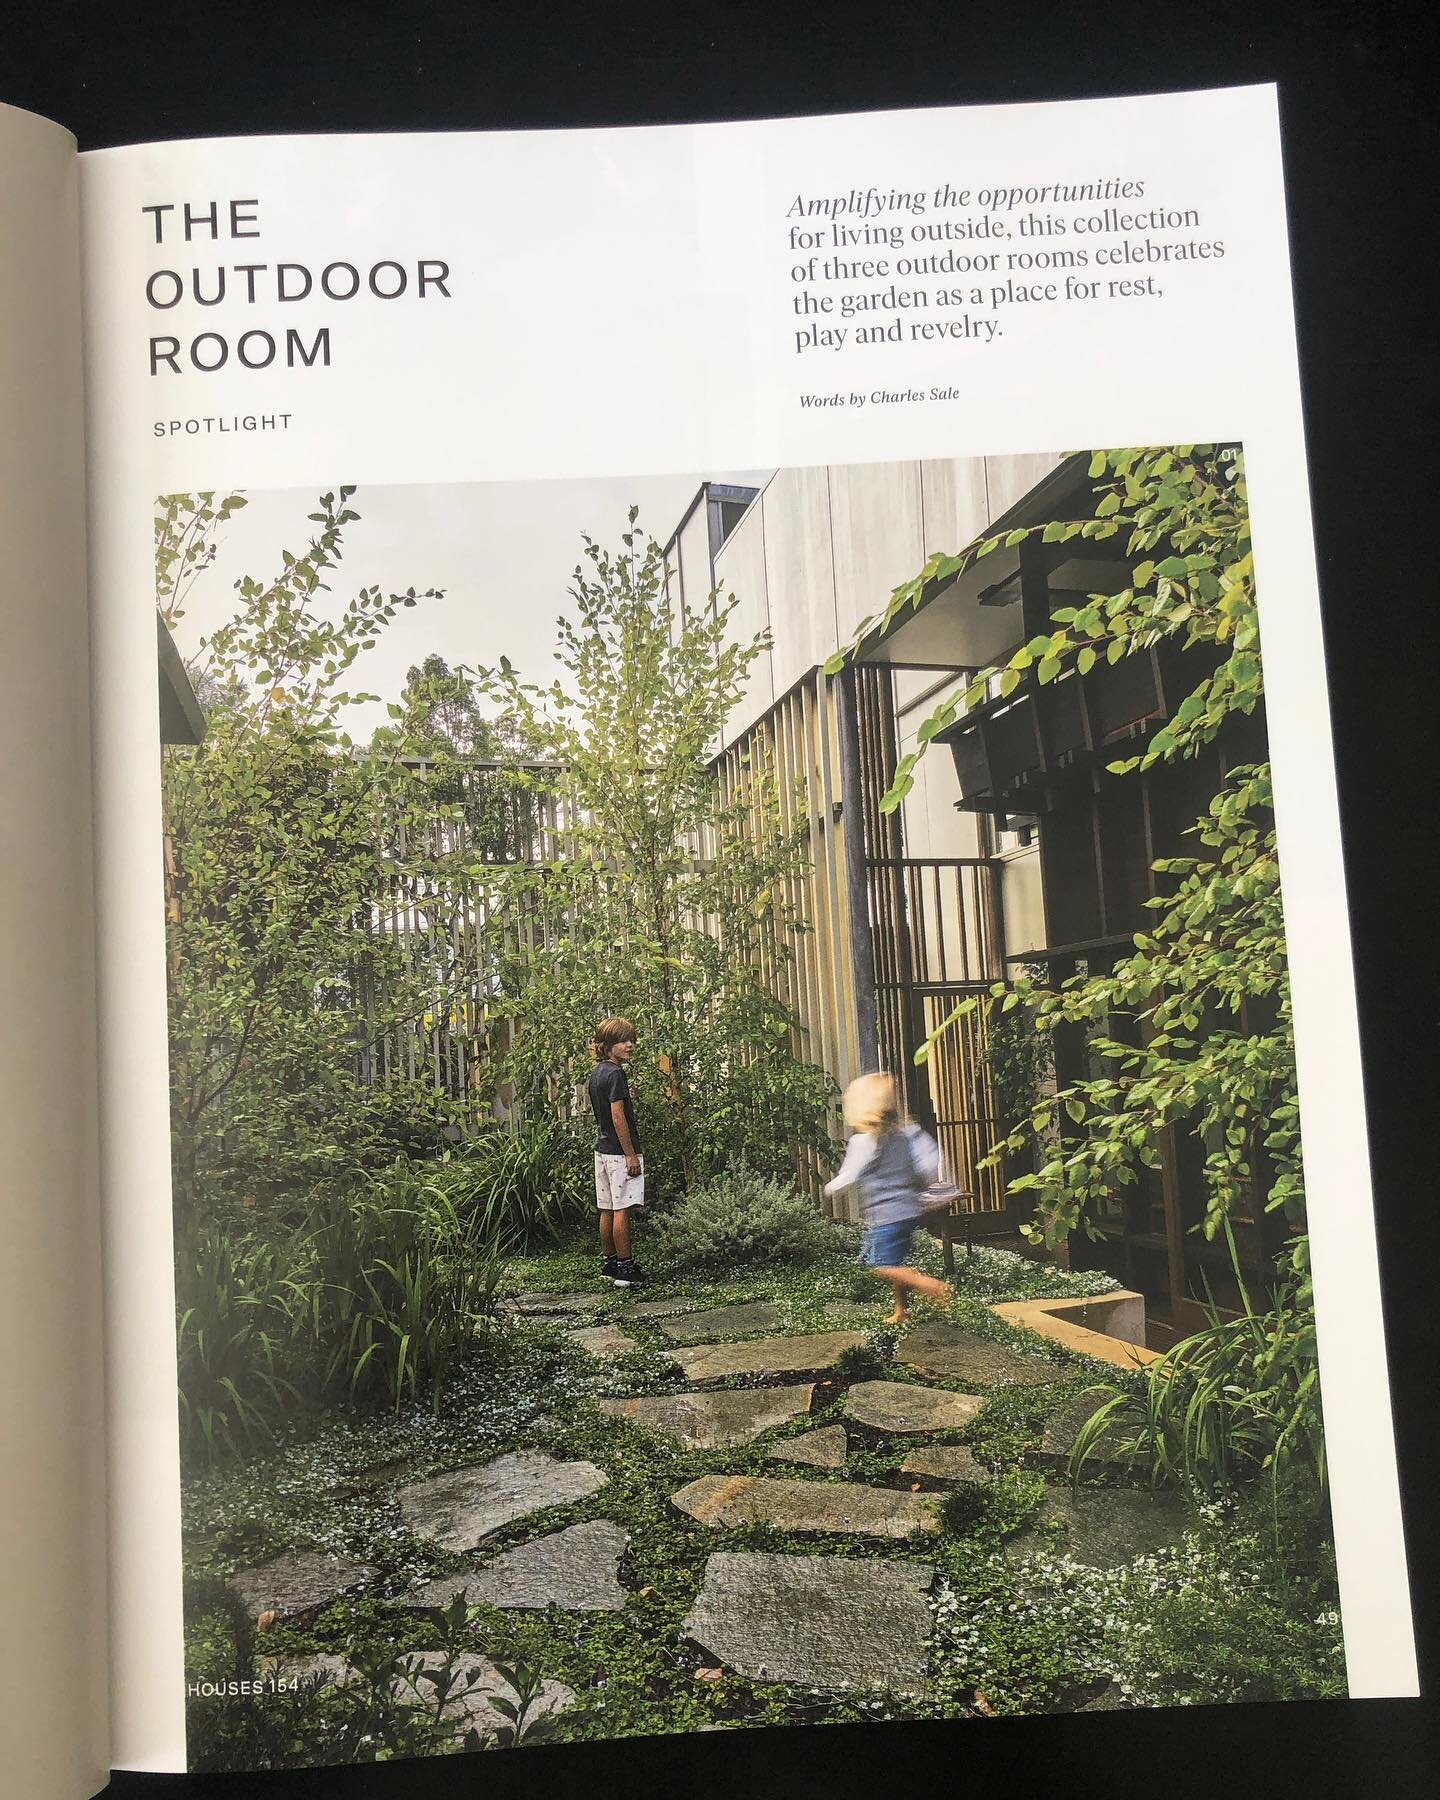 Is lovely to see the Y3 Garden pop up again in print - not the least in my fave @housesmagazine 

Thanks to @alexakempton for making this happen, and to @chuckd666 for the kind words.

Y3 Garden, 2019.

🏠 @partnershill as Donovan Hill 
🌱 @sanctuary